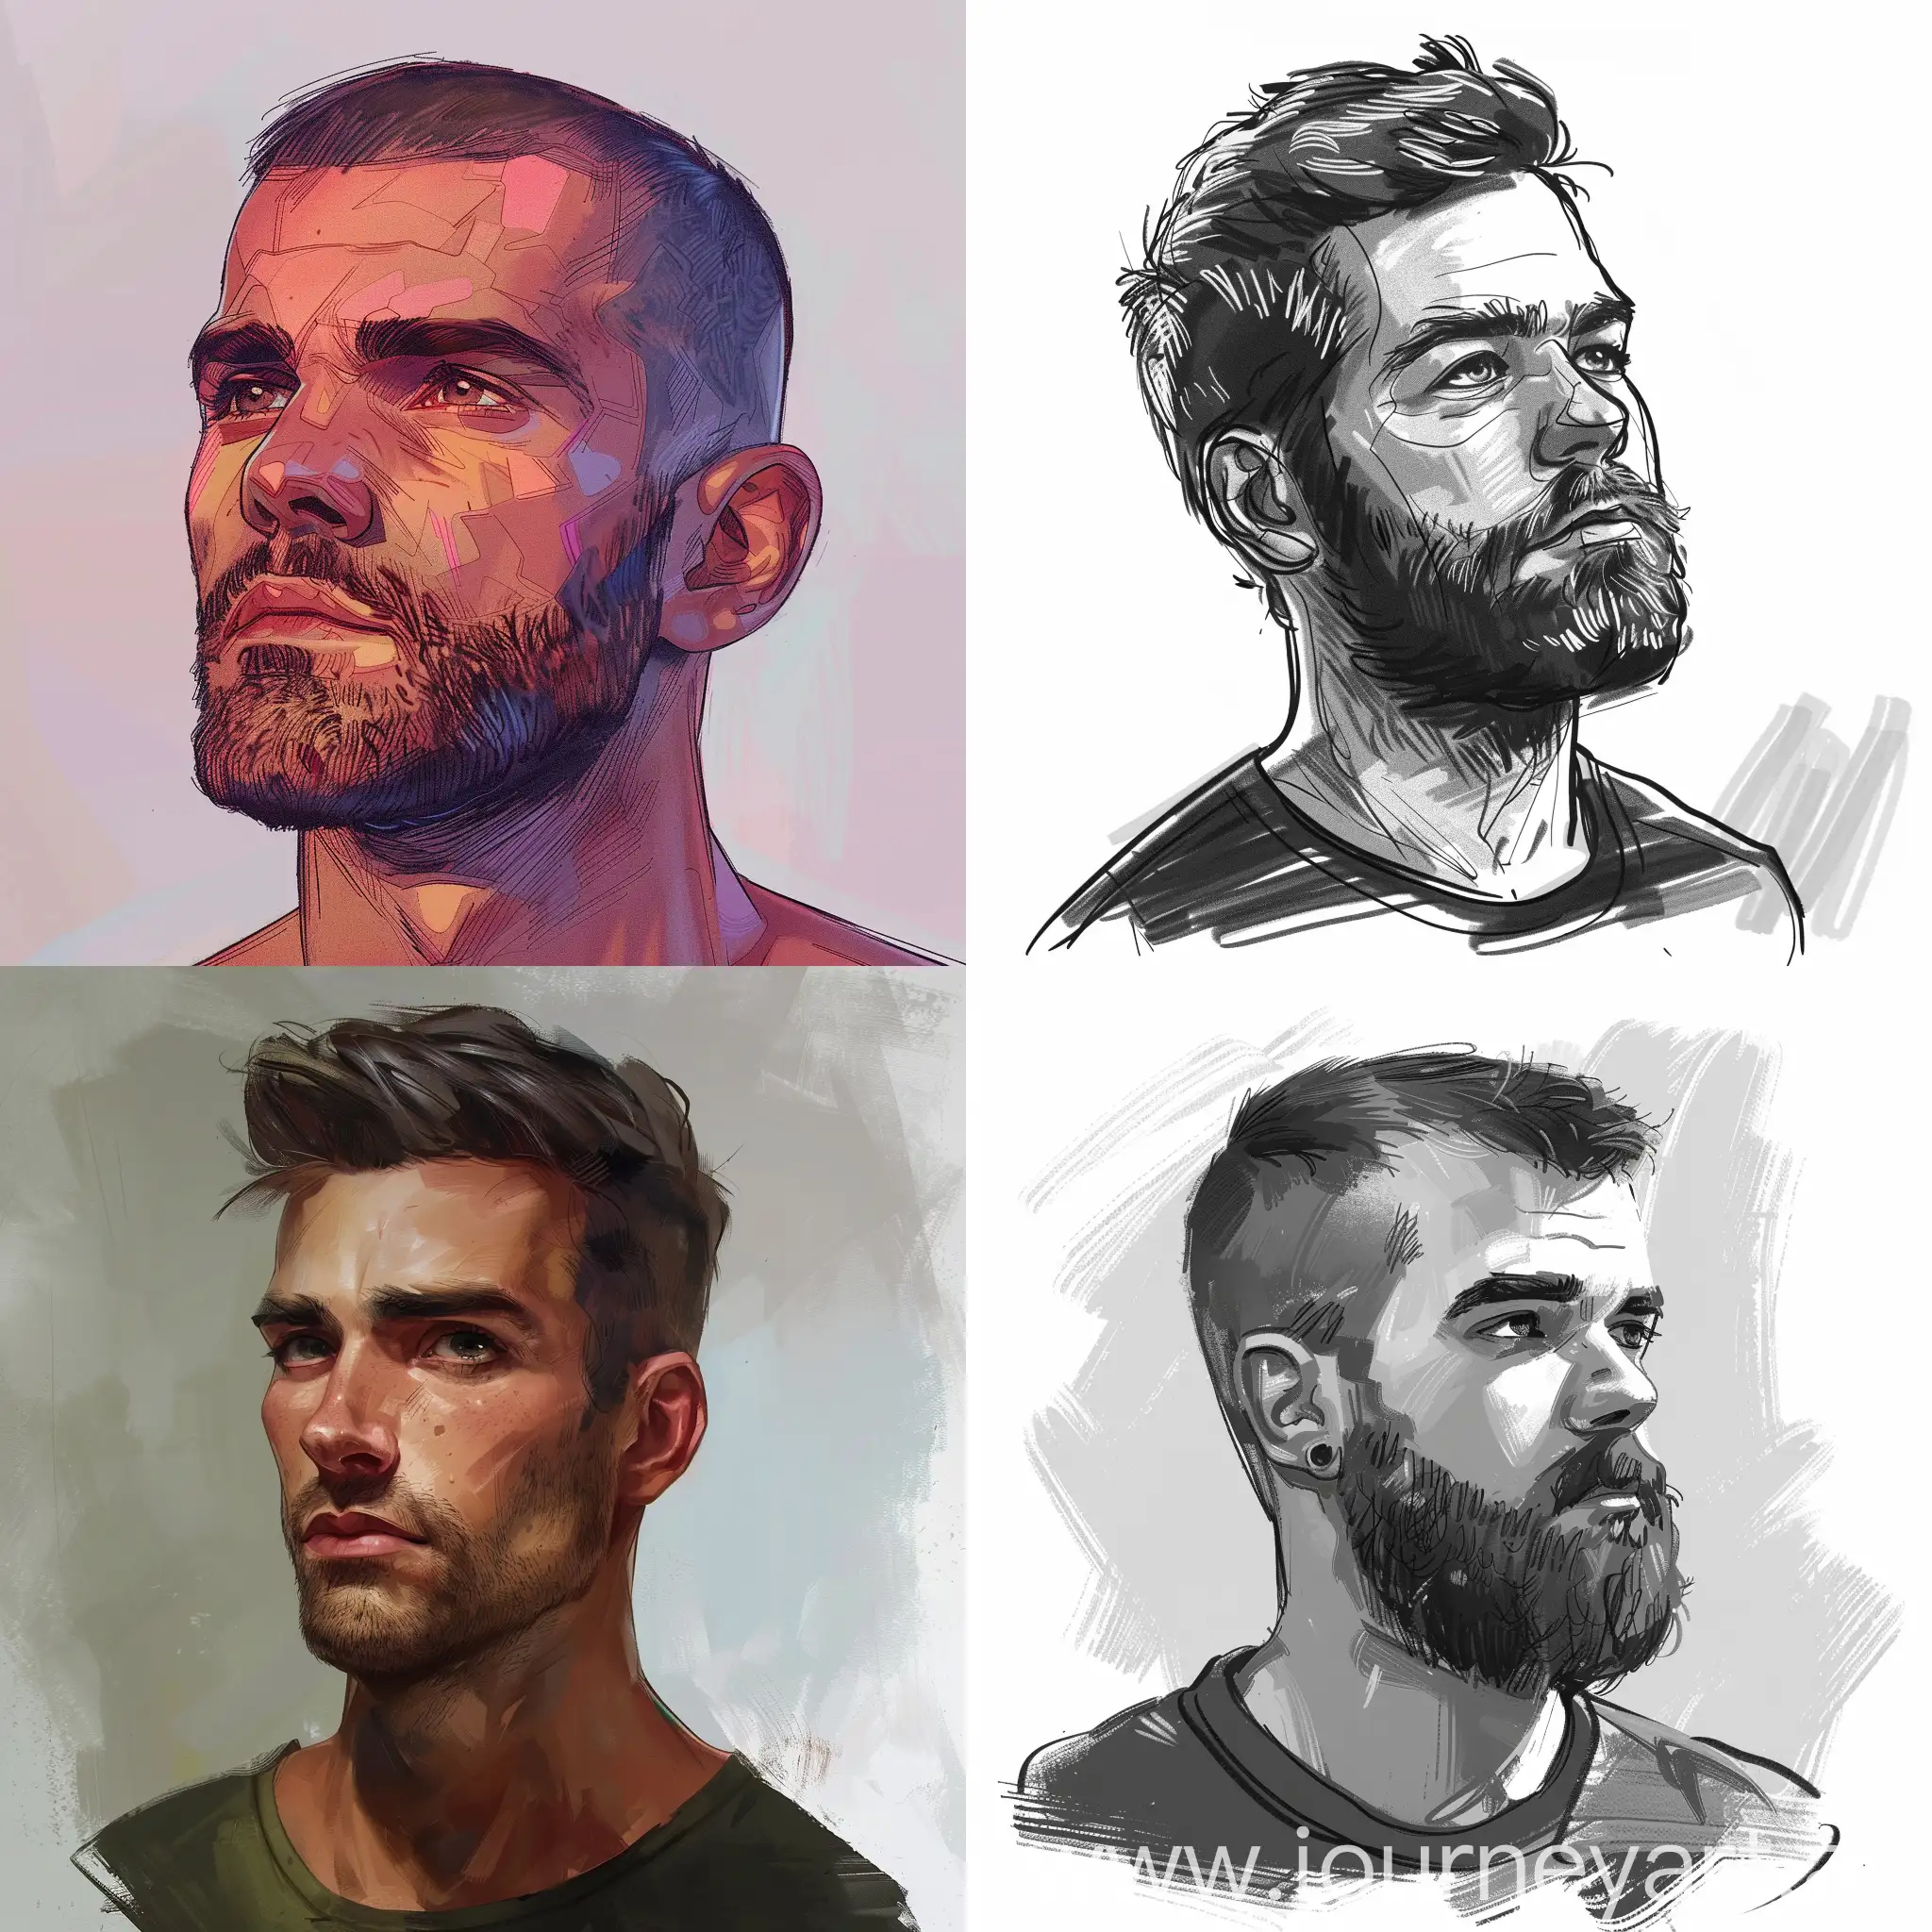 A man with very short hair and a small beard in 2D.